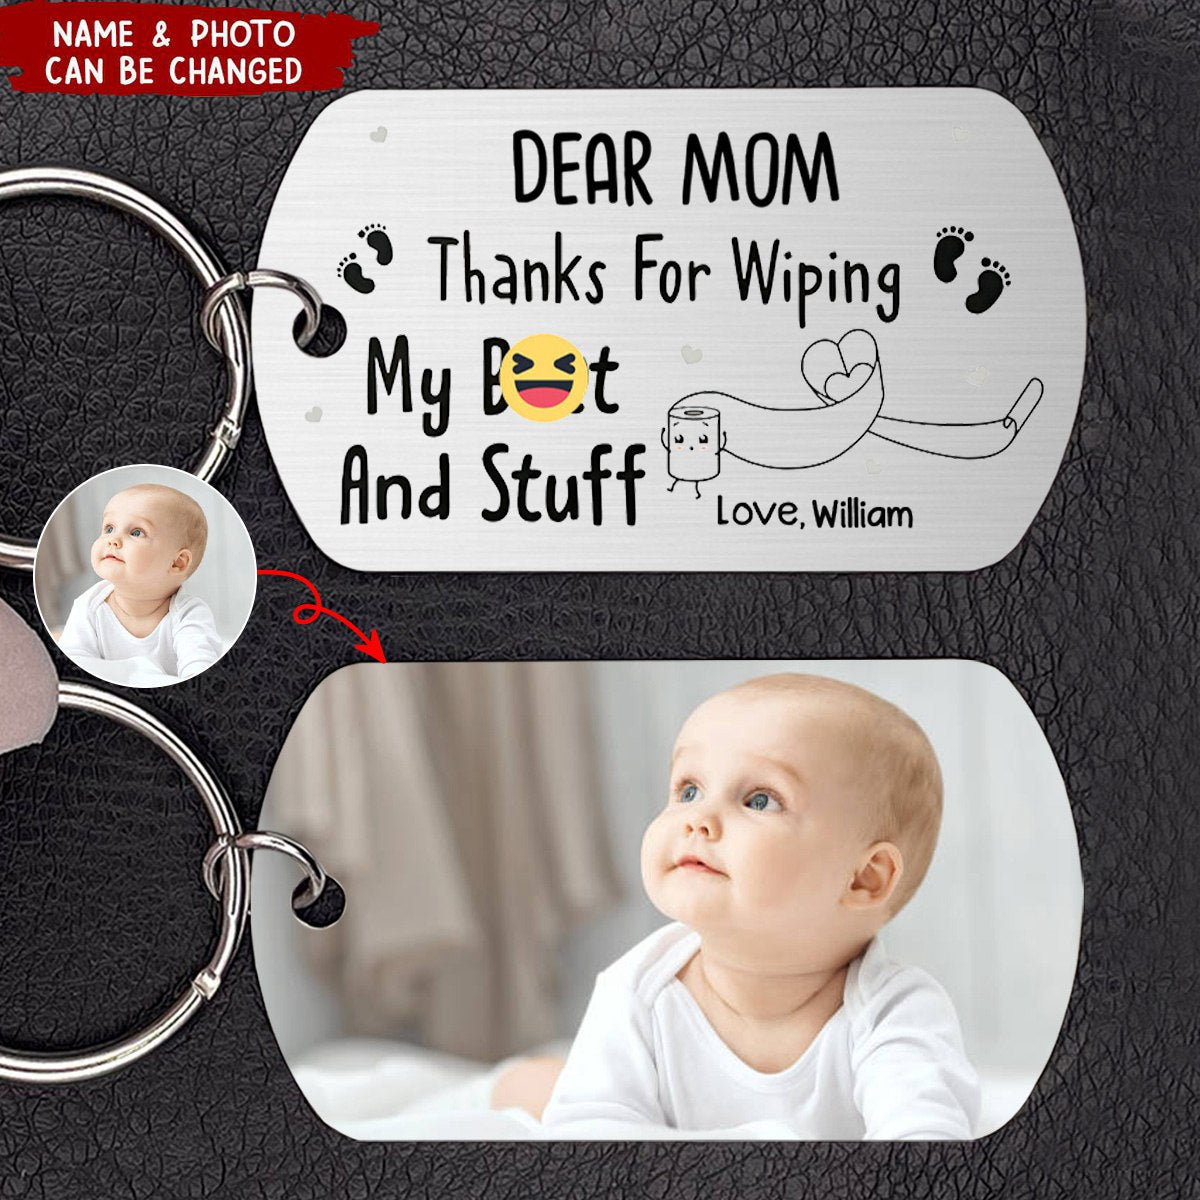 Custom Photo Thanks For Wiping - Personalized Stainless Steel Keychain